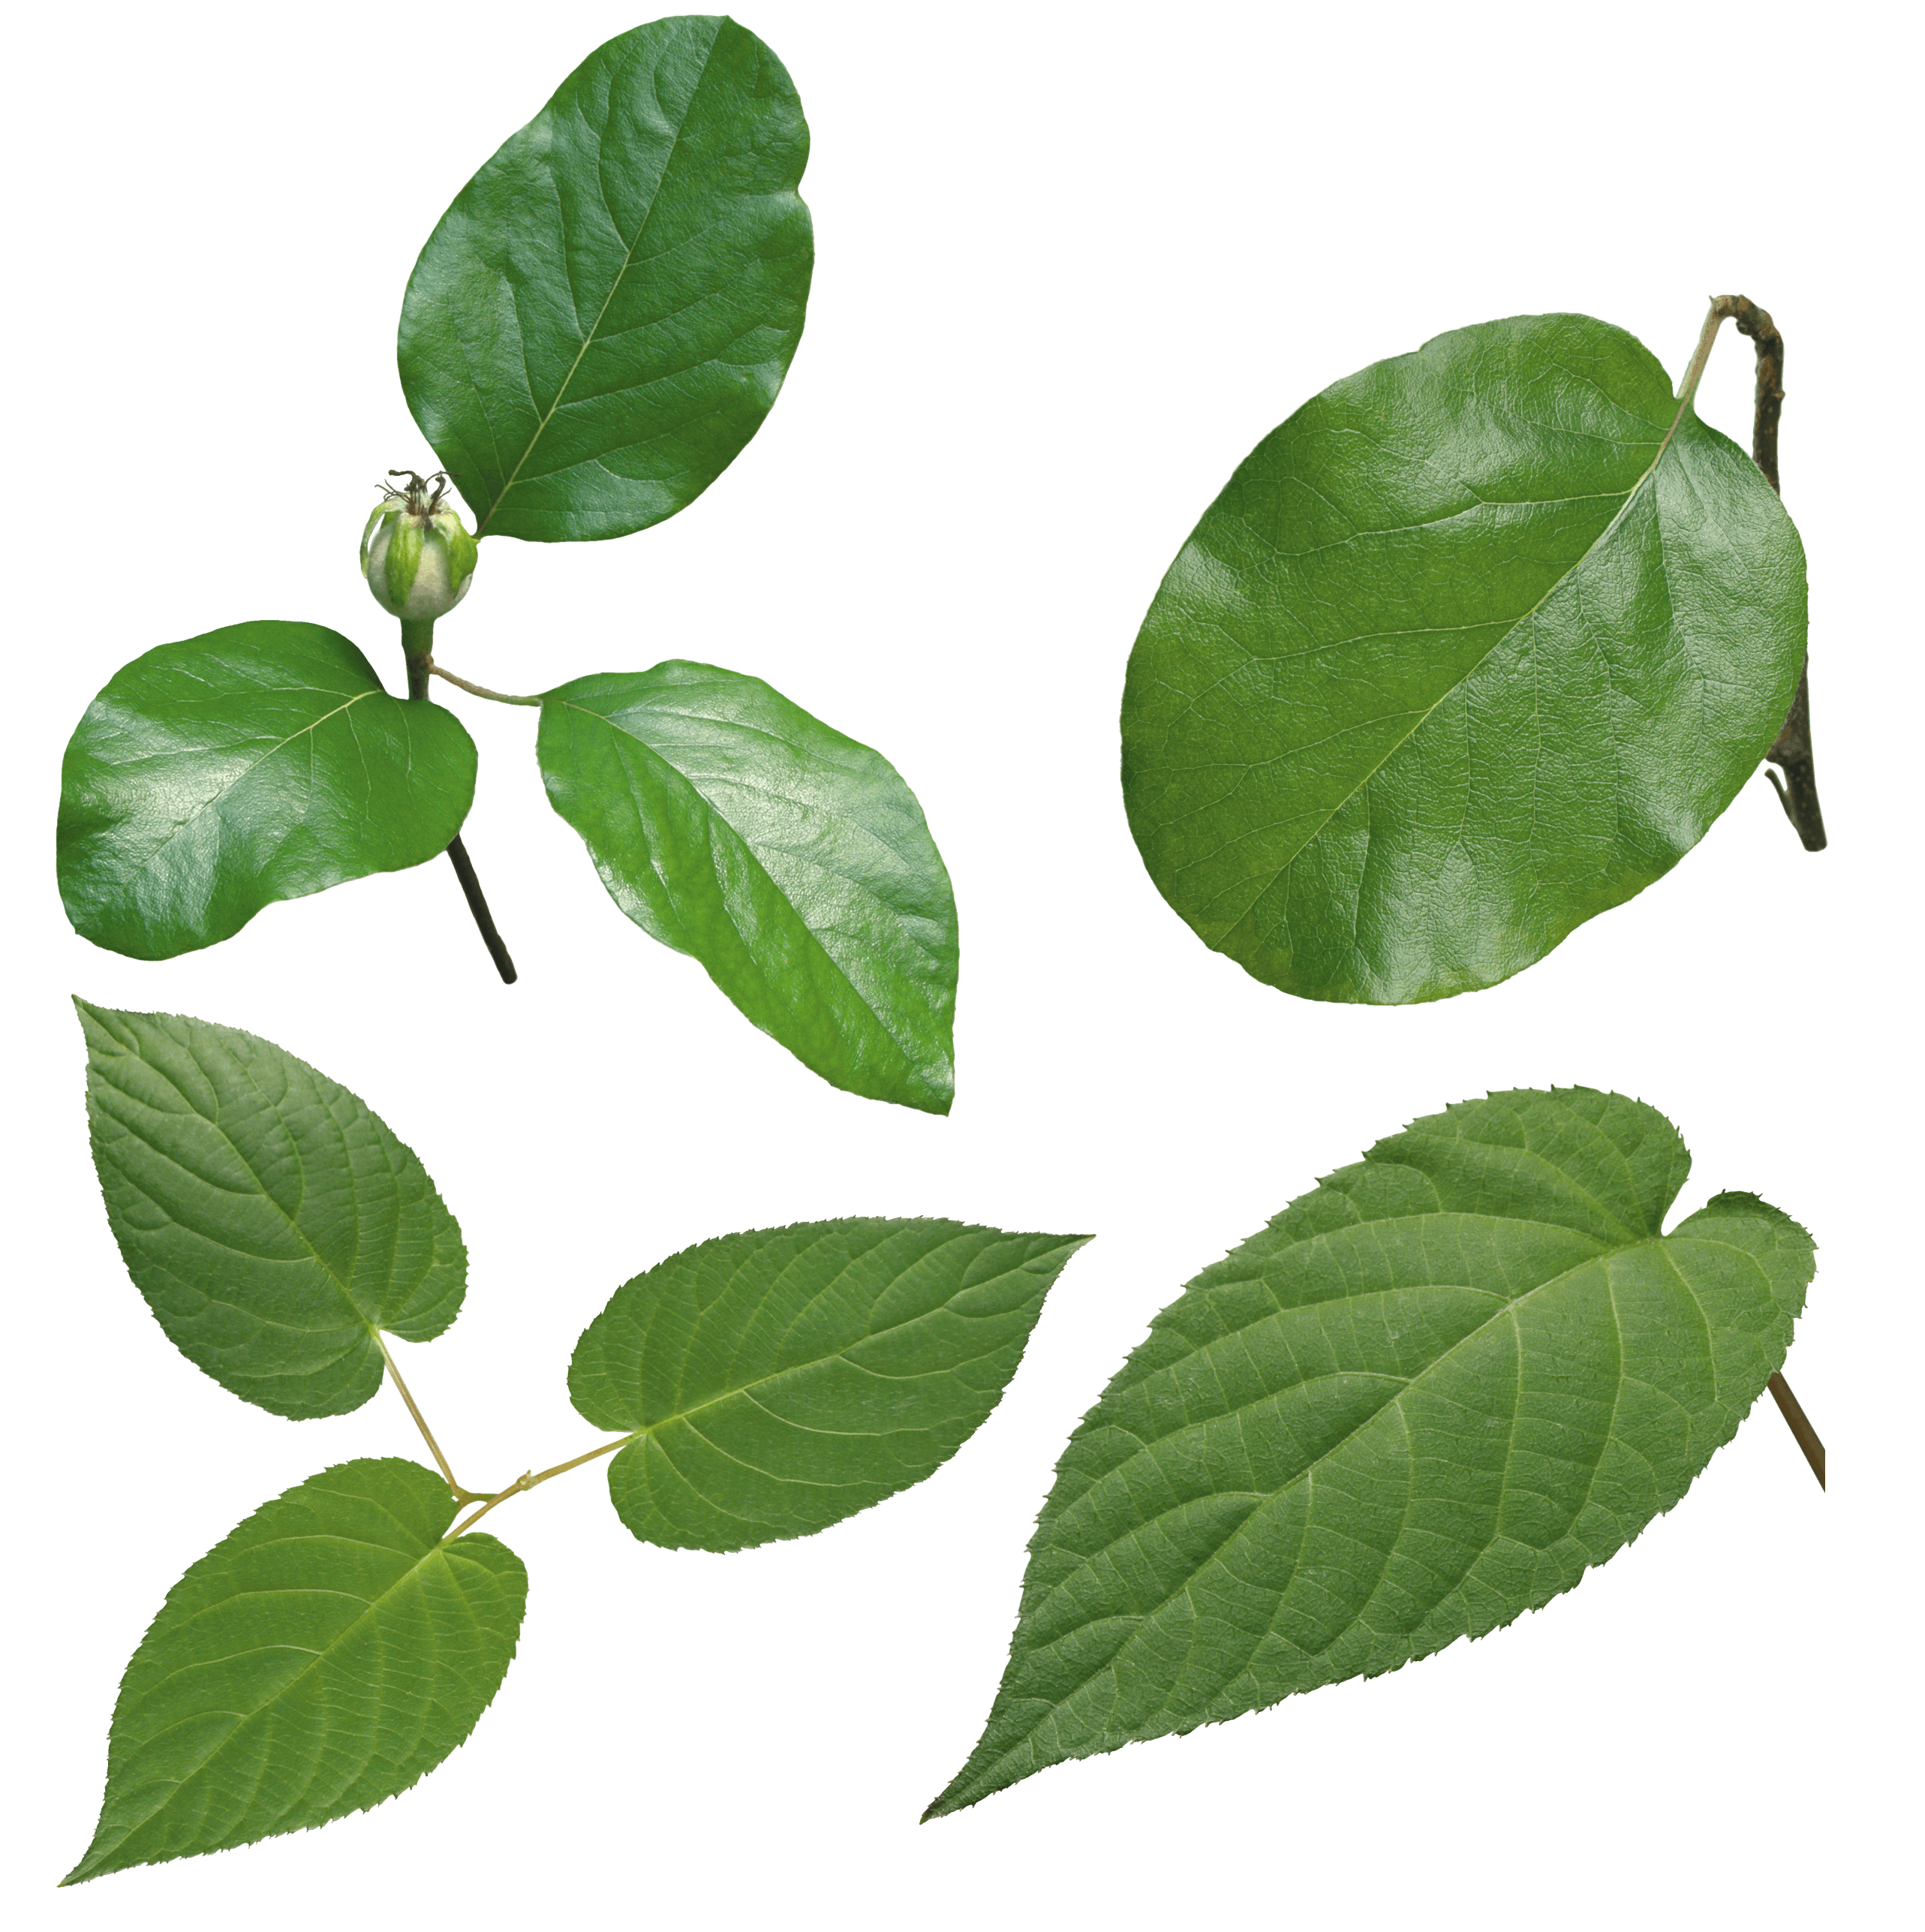 Green Leaves Image PNG Image